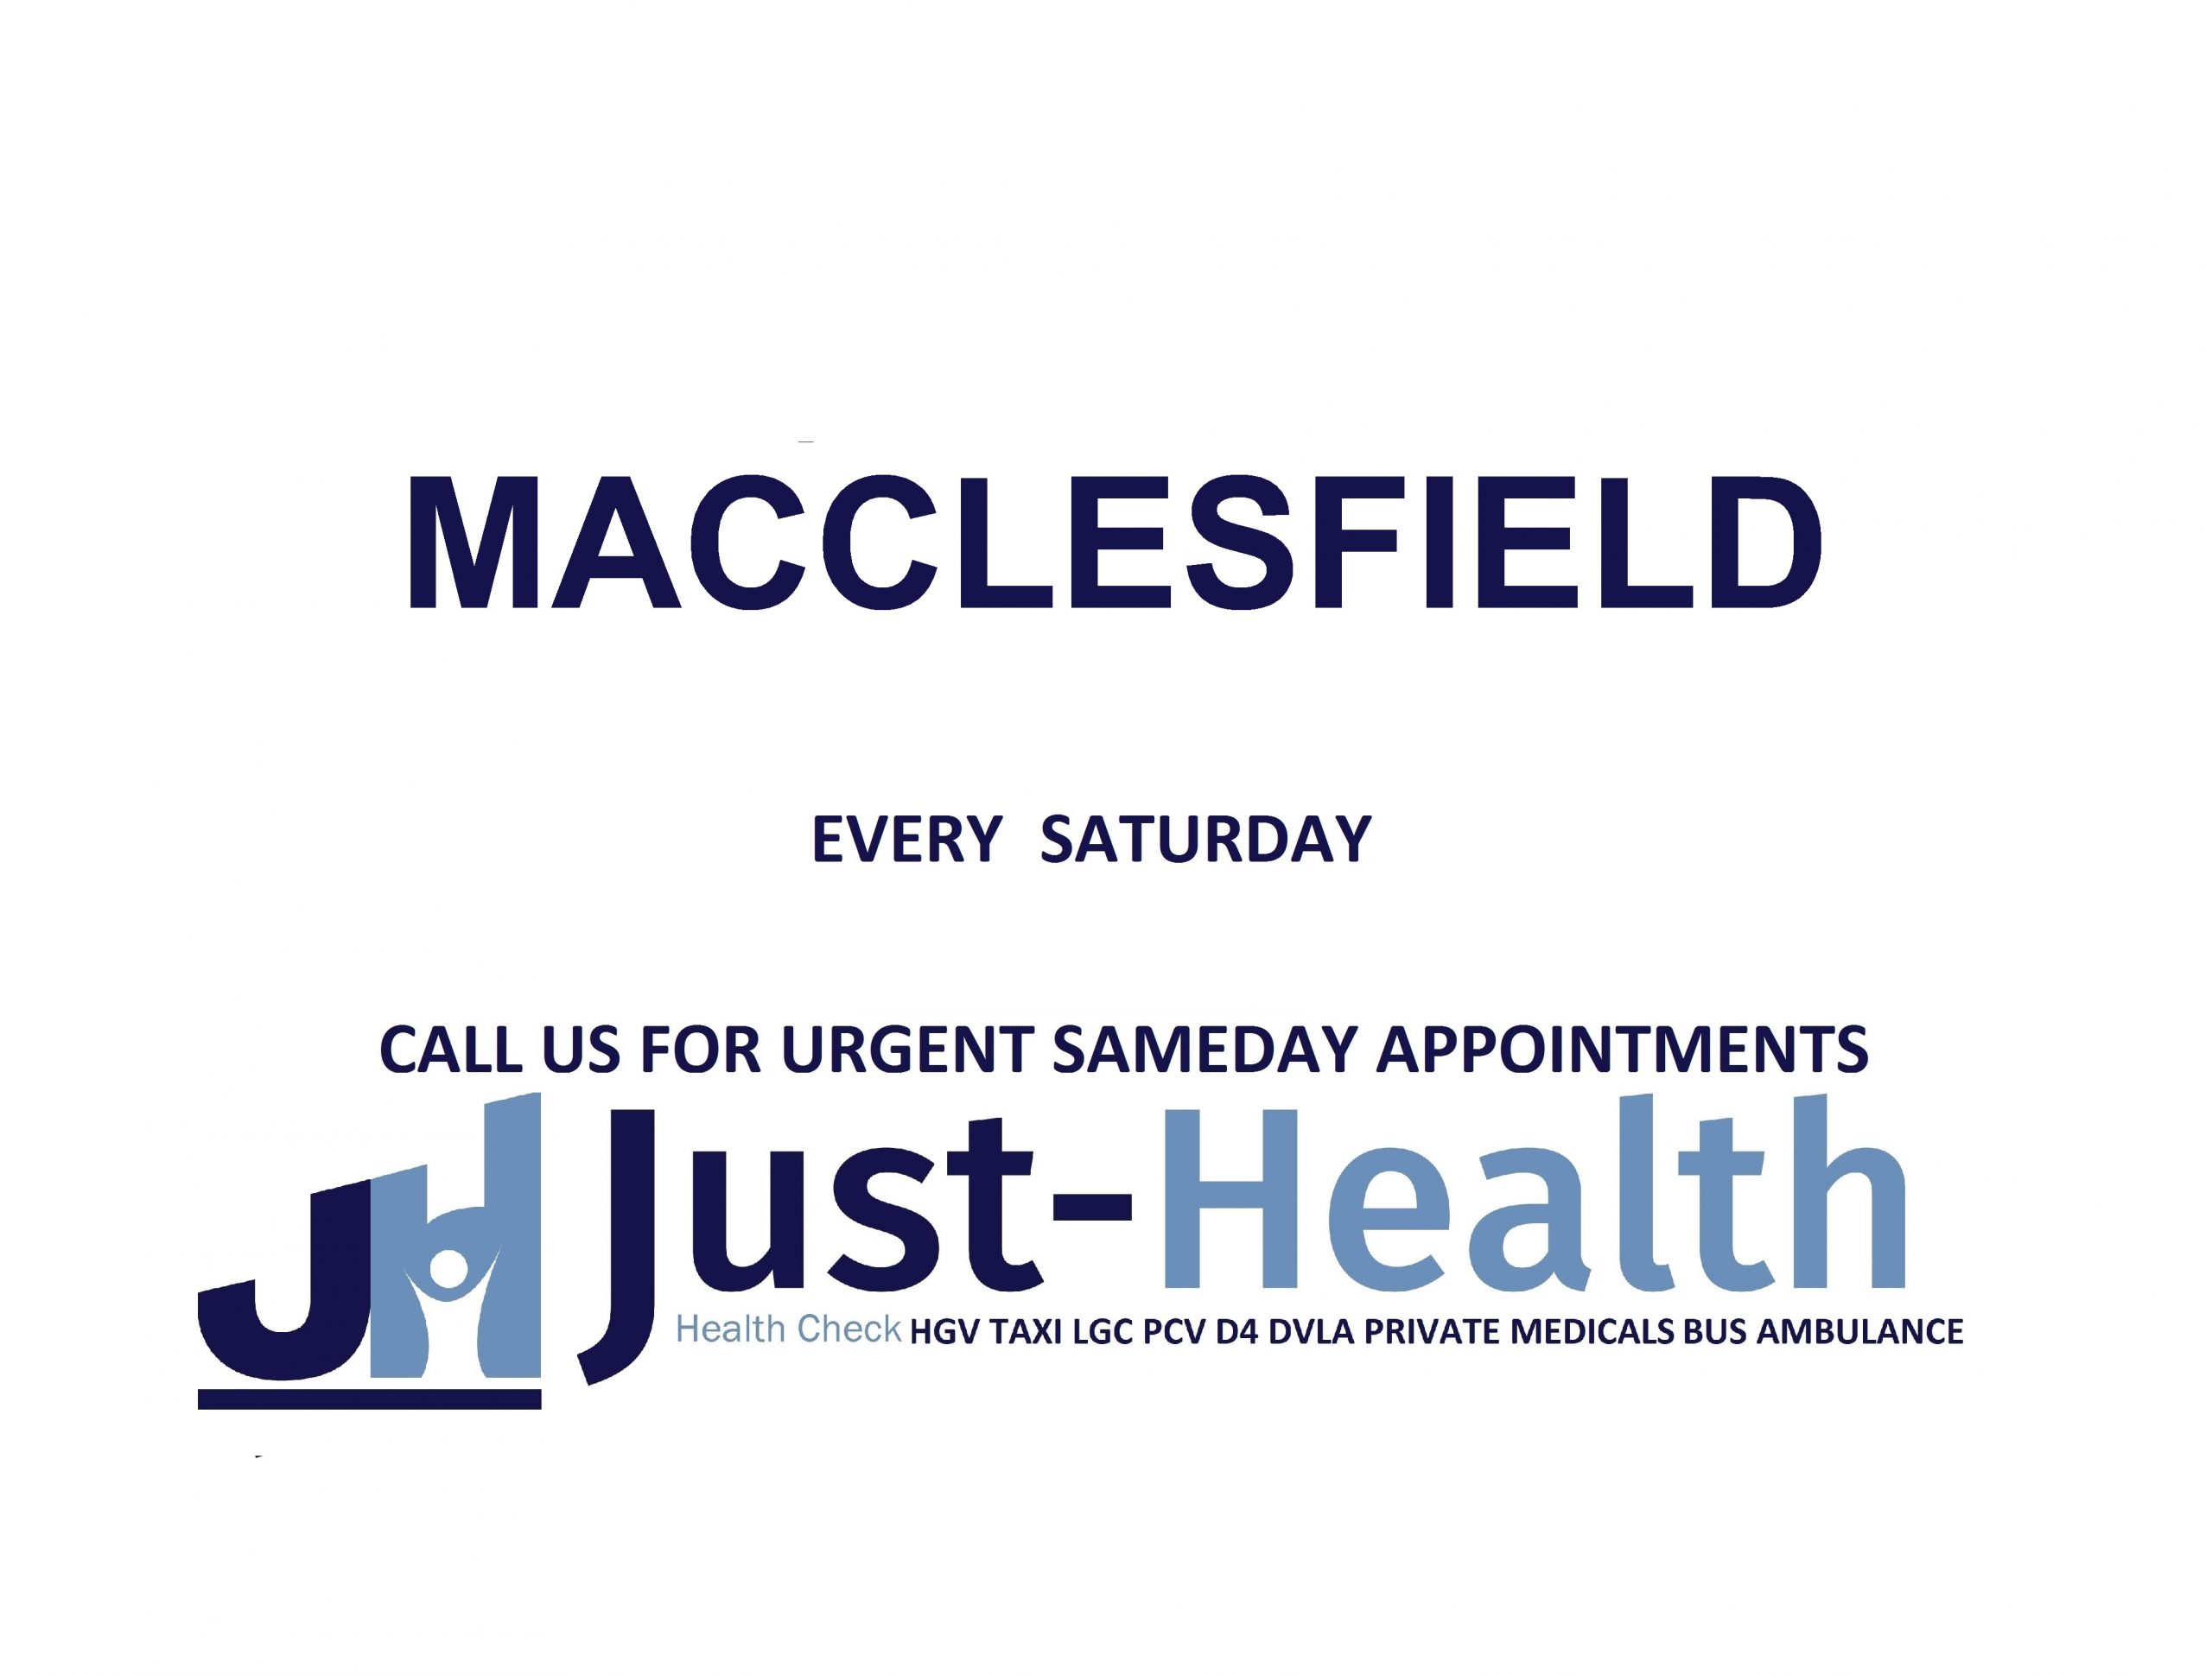 Just Health HGV Medical Wakefield D4 Driver Medicals & Private Gp services